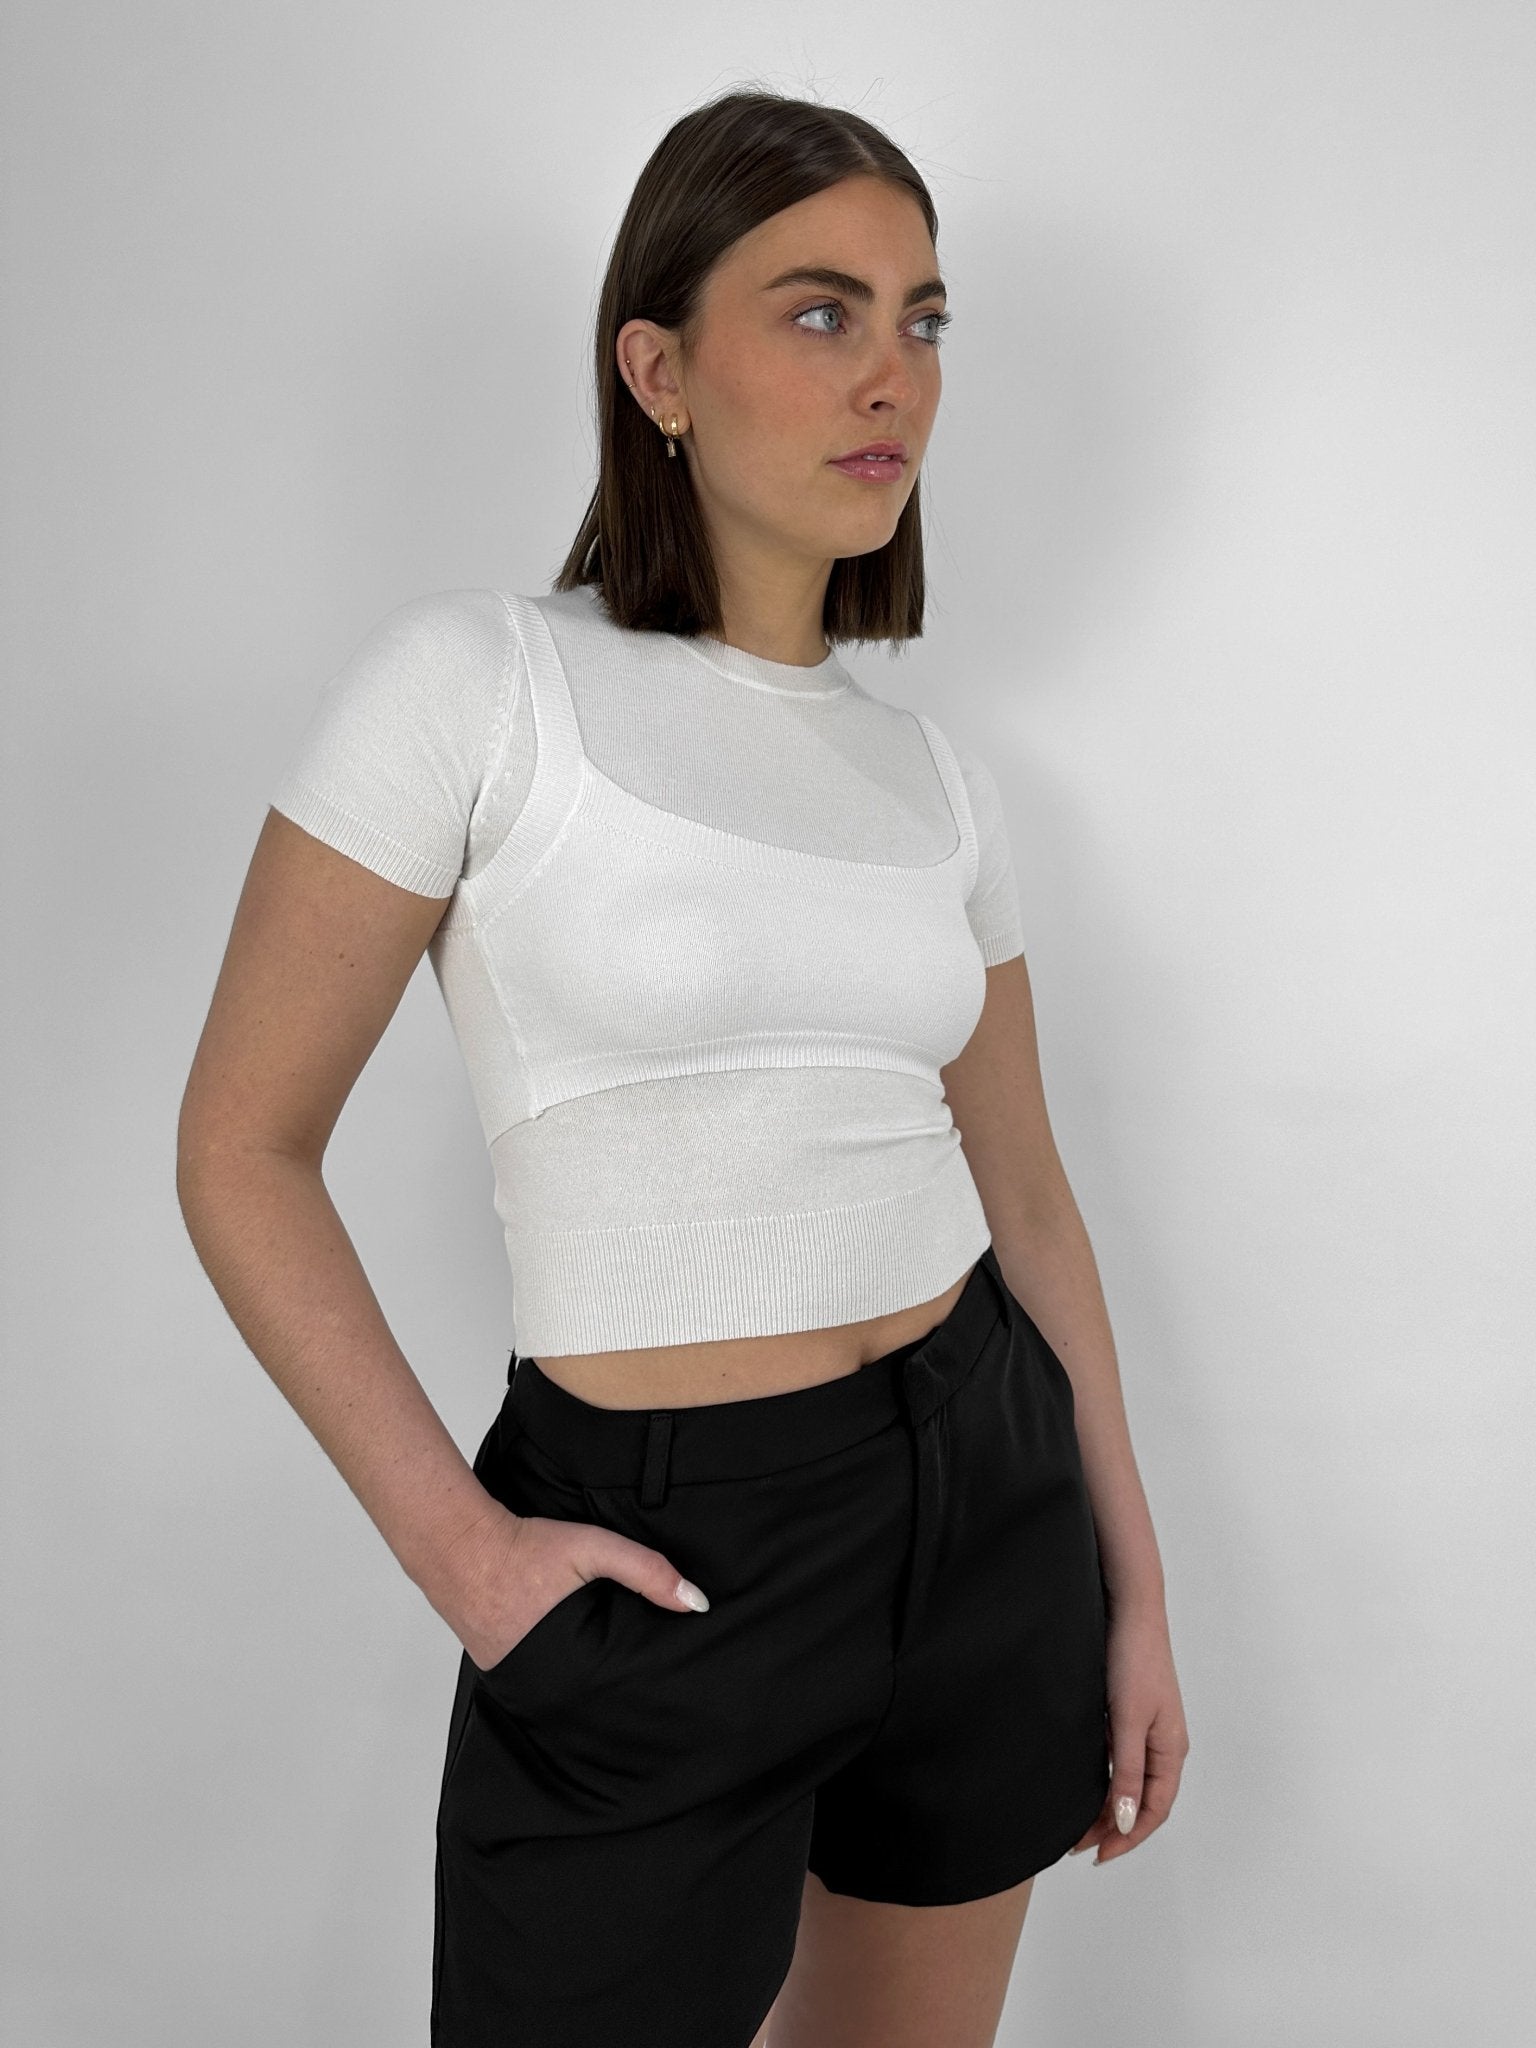 Layered Bra Knit Crew Tee - Vamp Official